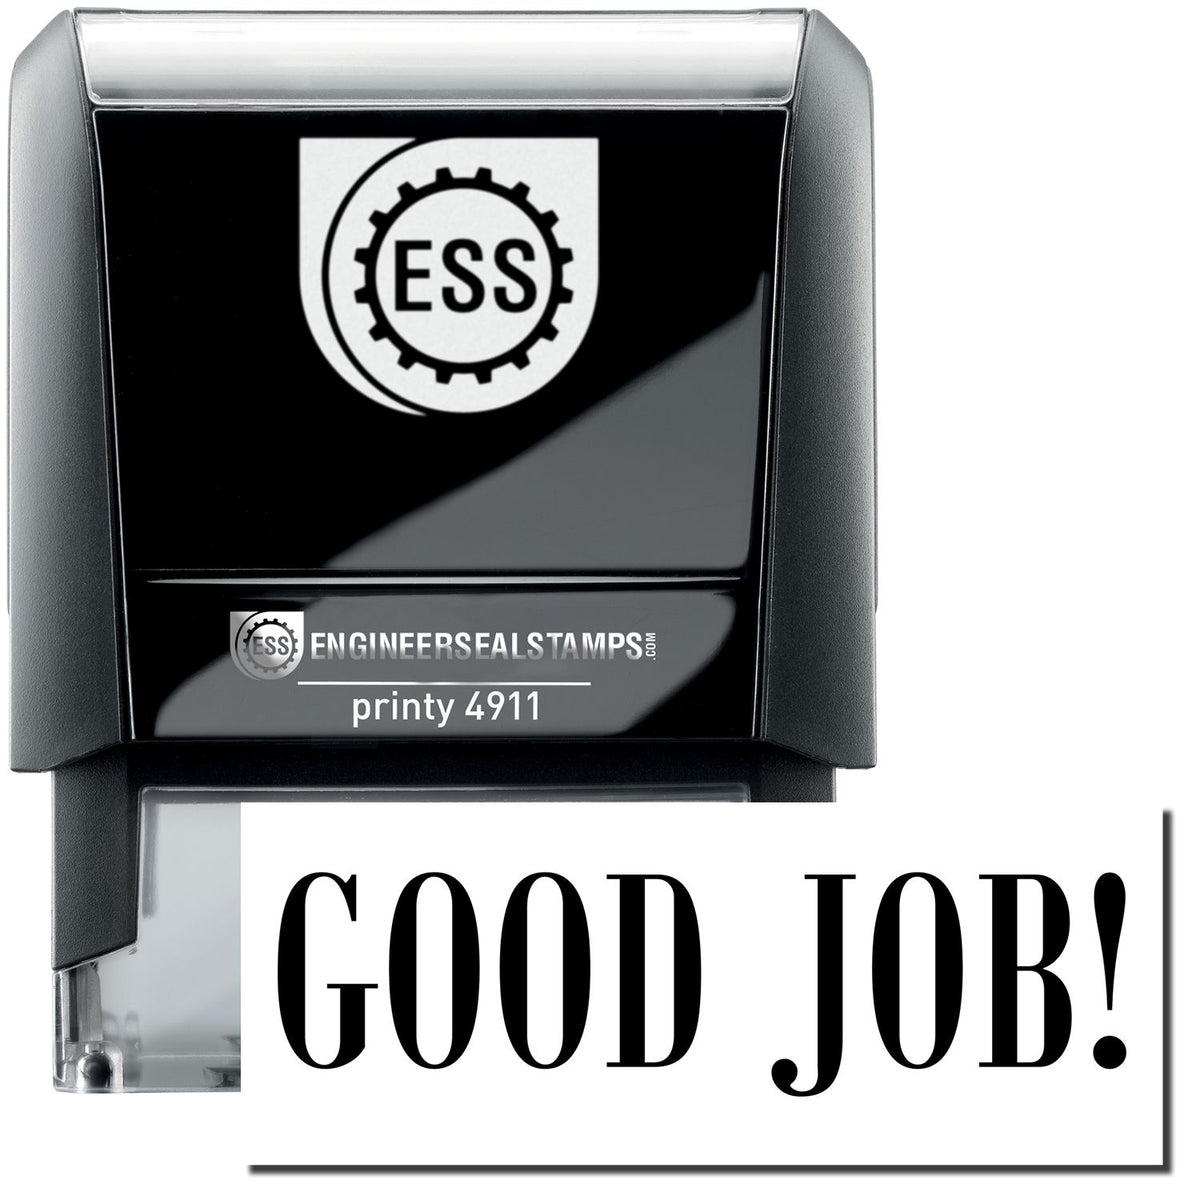 A self-inking stamp with a stamped image showing how the text &quot;GOOD JOB!&quot; is displayed after stamping.